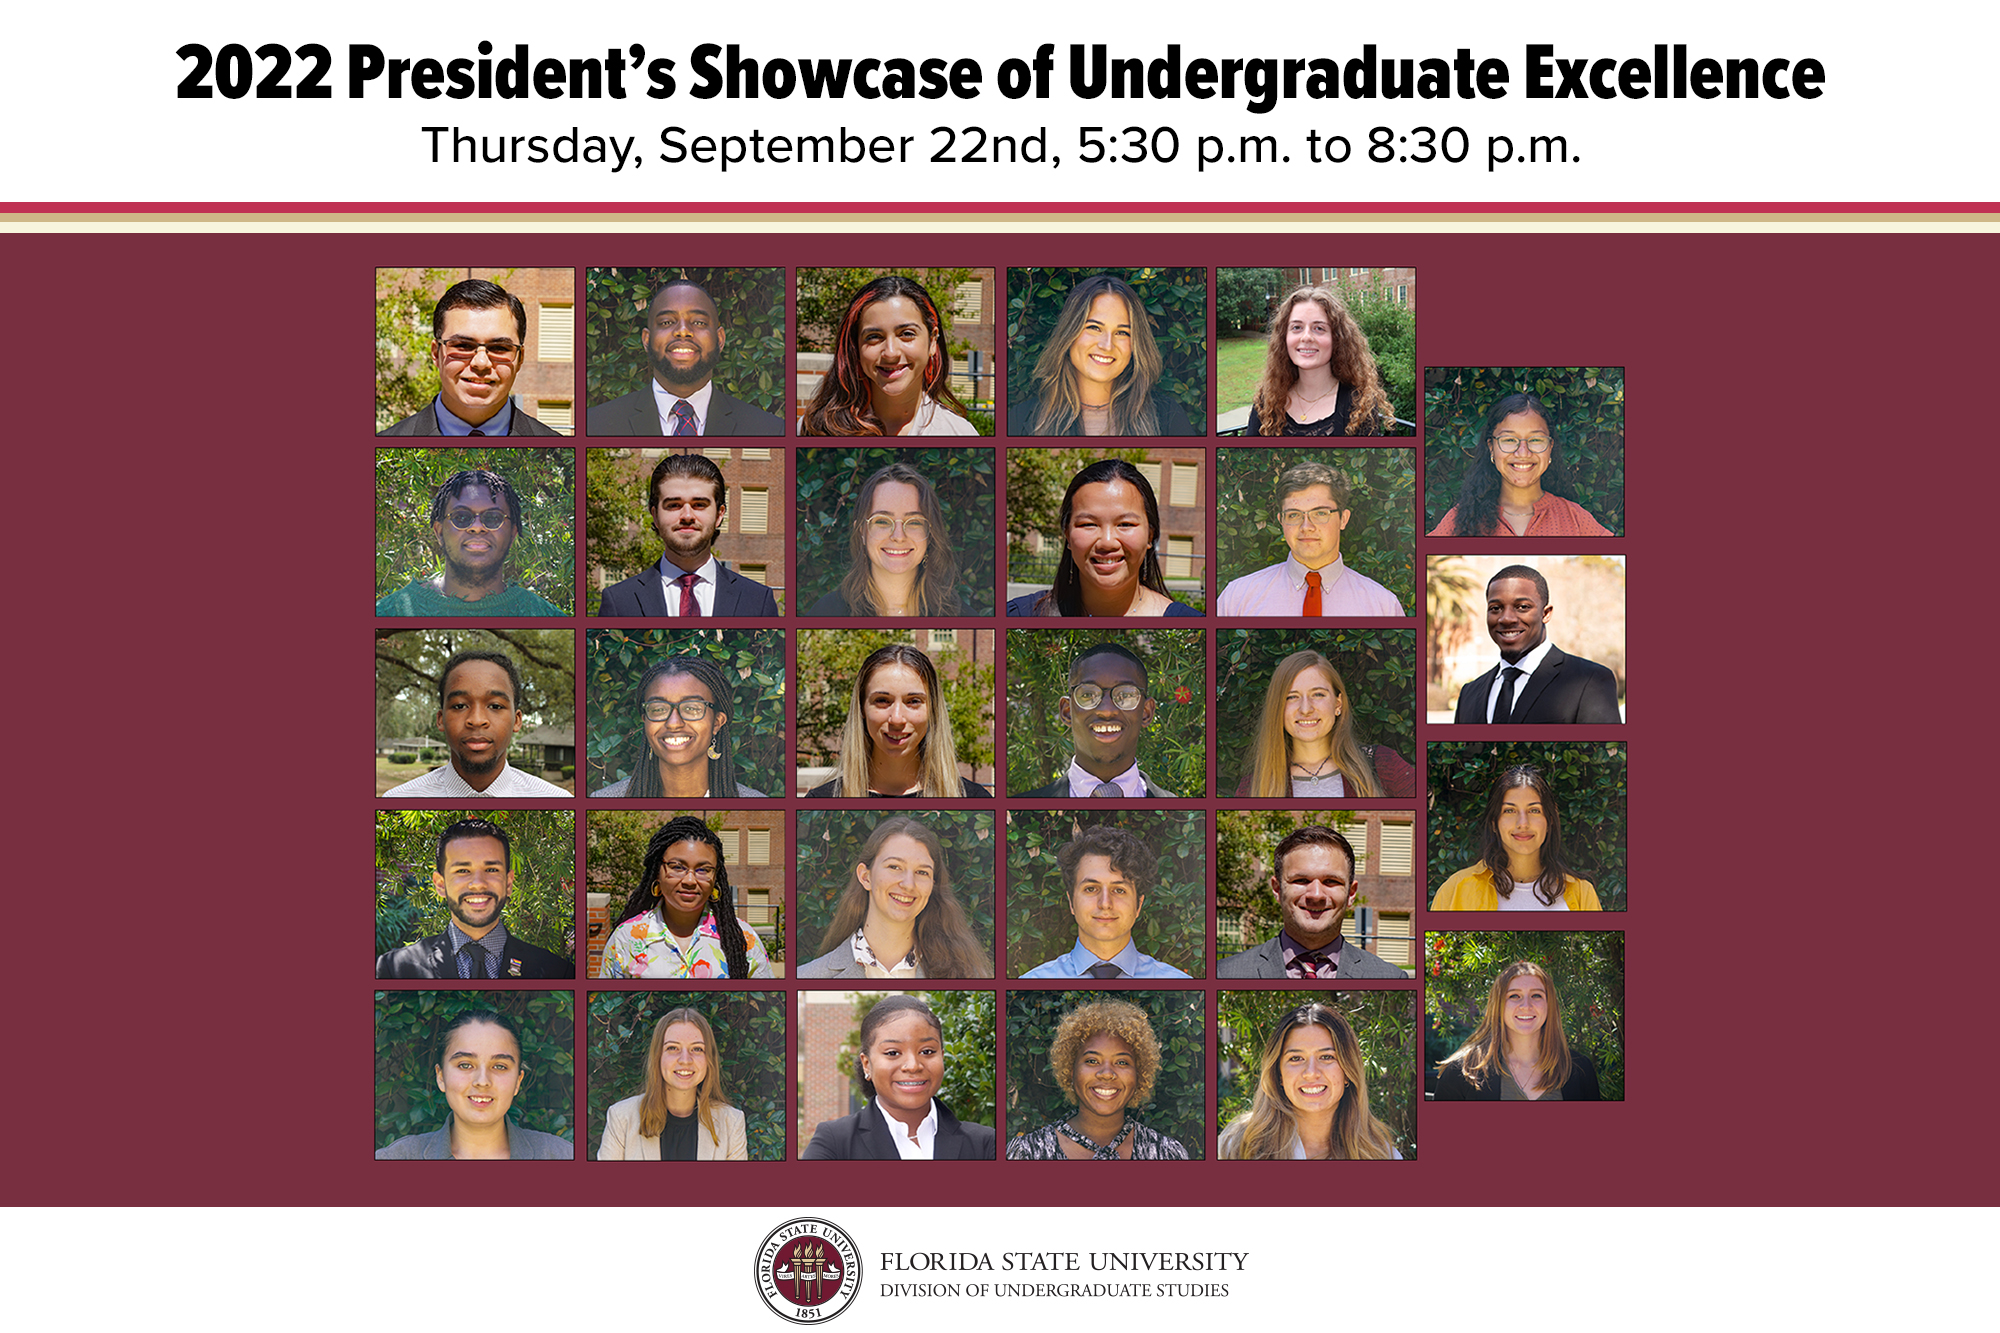 The image shows a collage of presenters' headshots for the President's Showcase. 